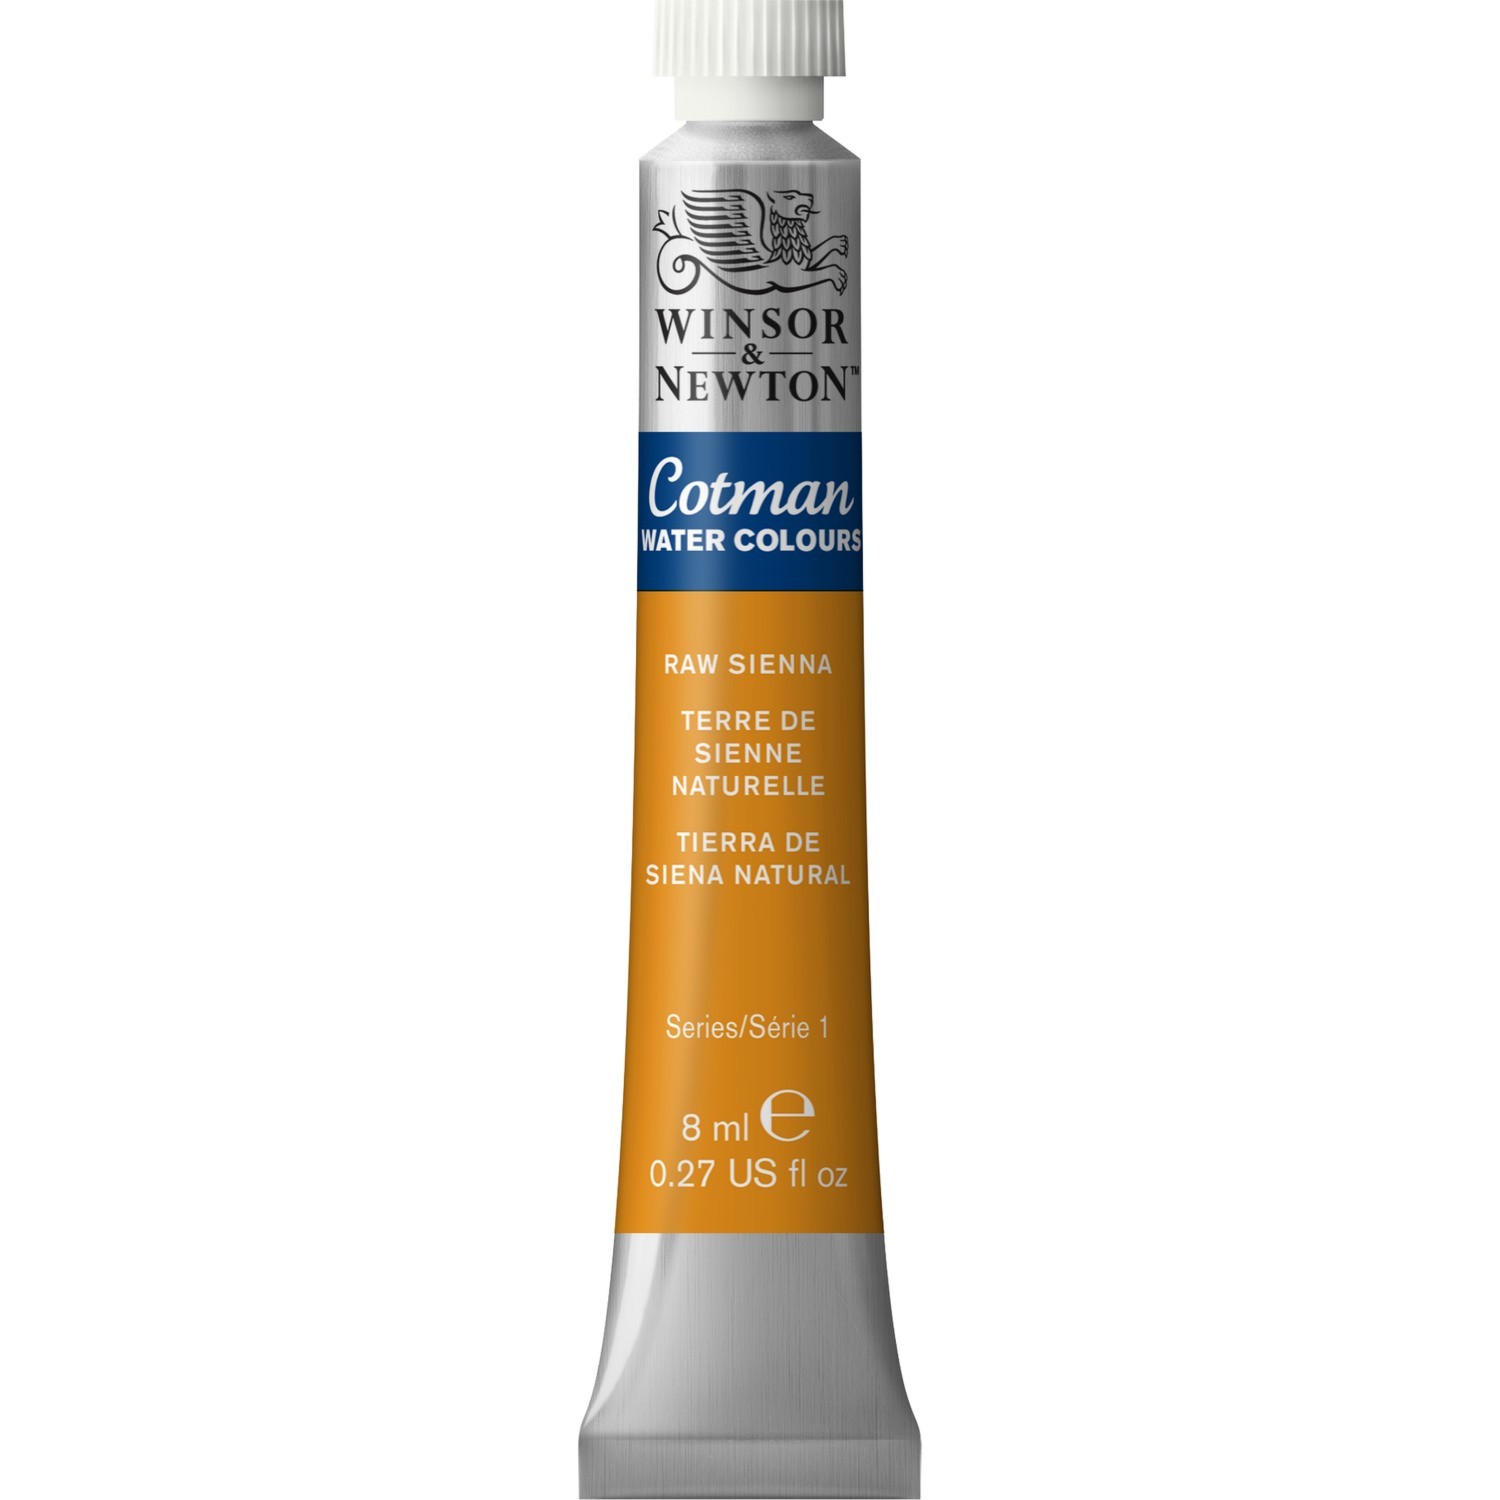 Winsor and Newton Cotman Watercolour Paint - Raw Sienna Image 1